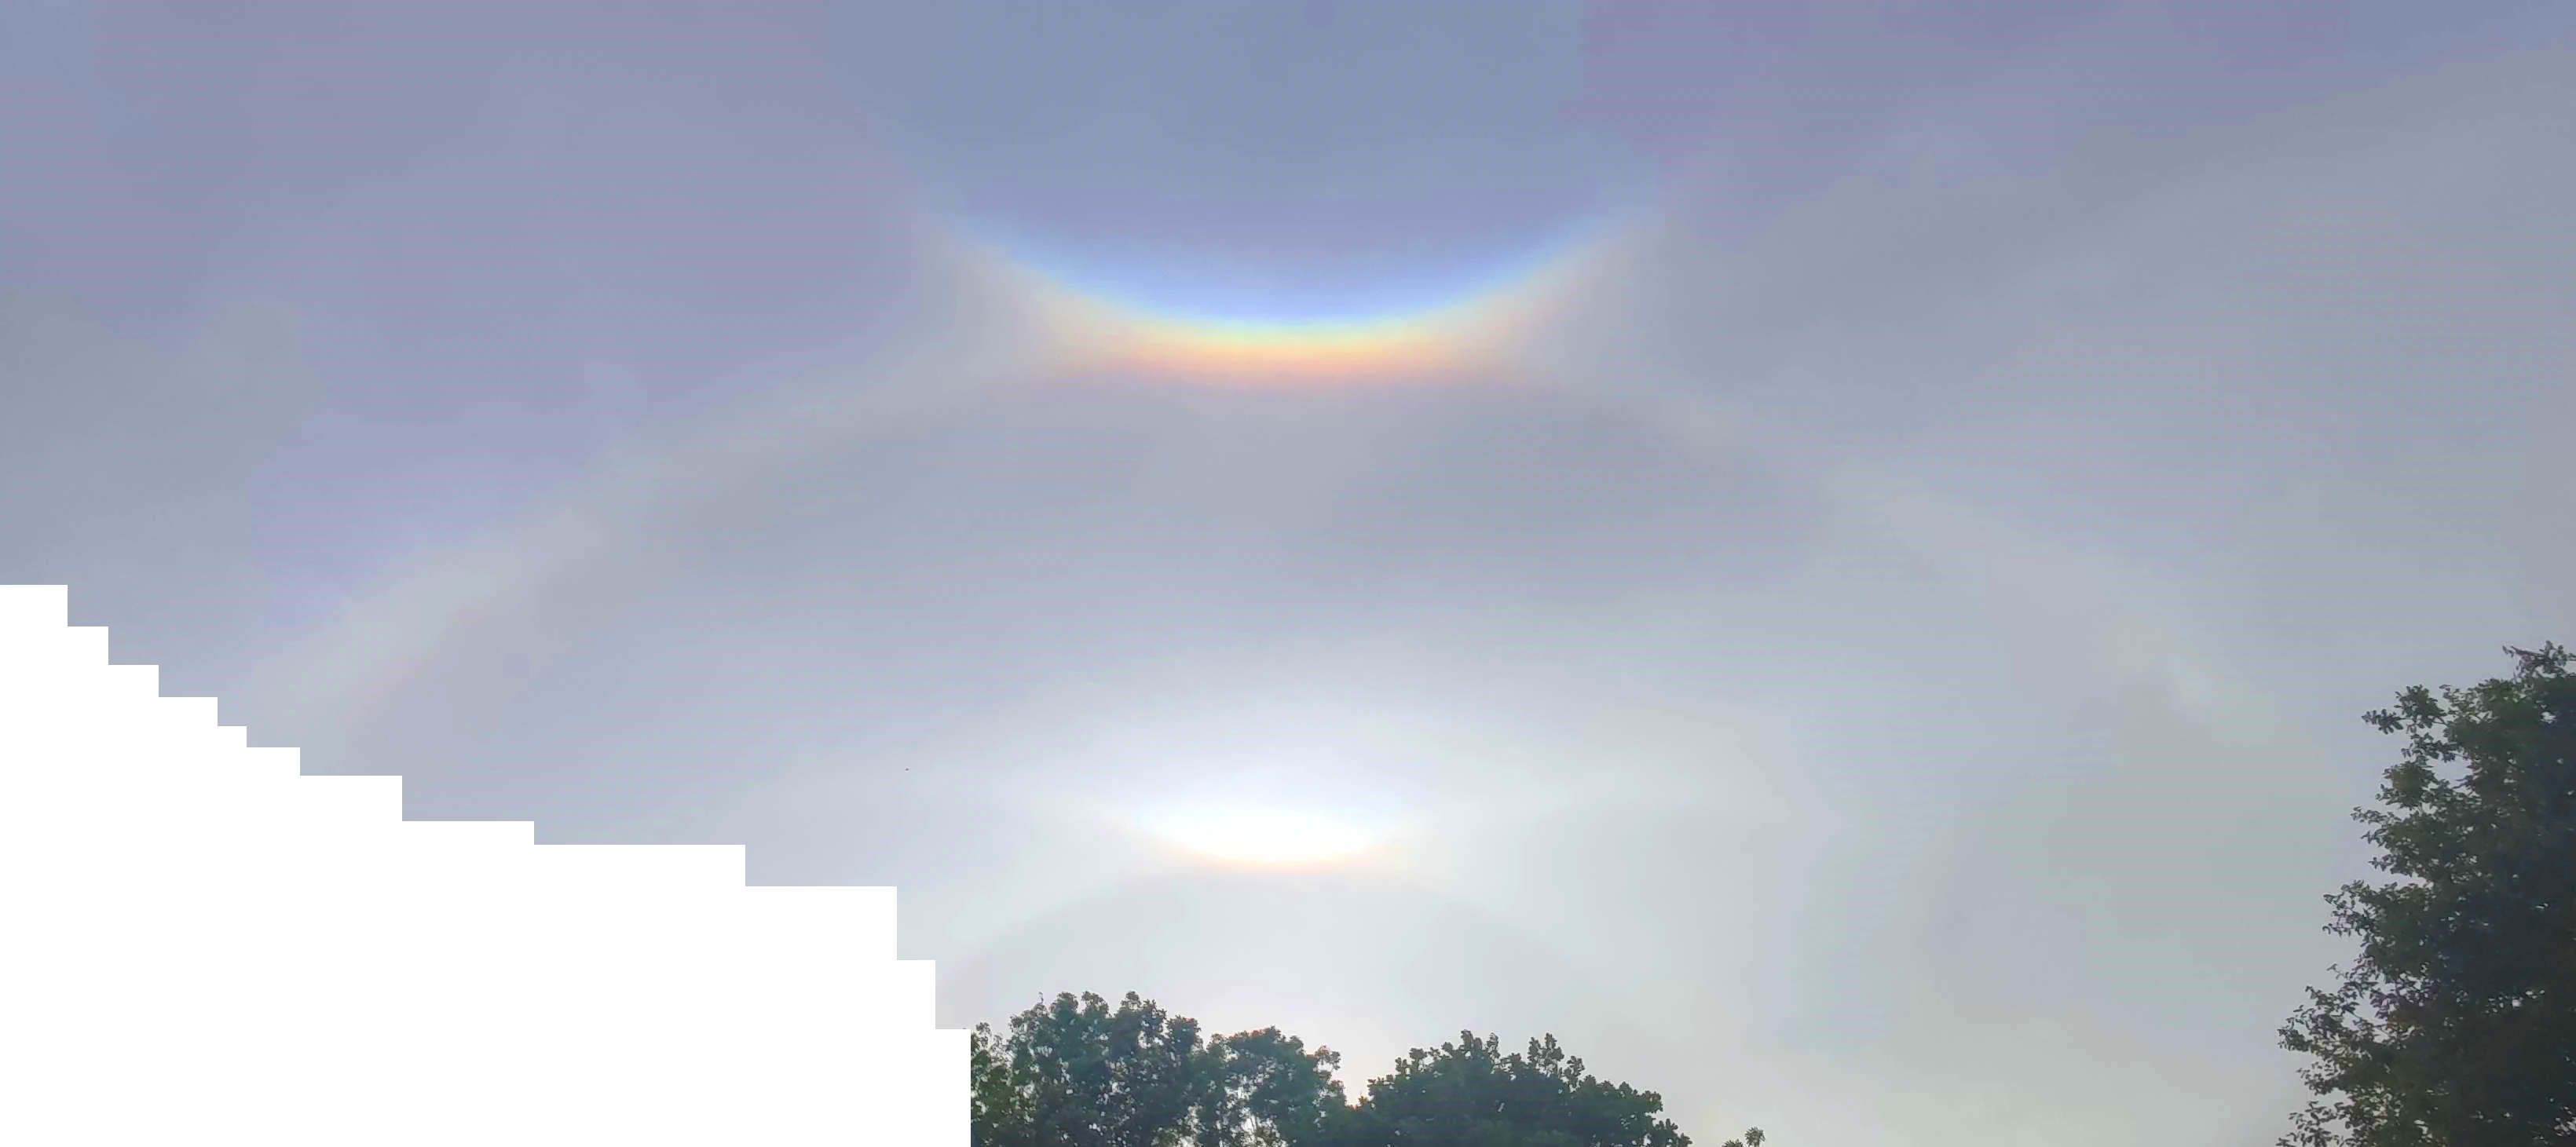 Two iridescent arcs intersect in the sky, a smaller version of the same phenomenon playing out below